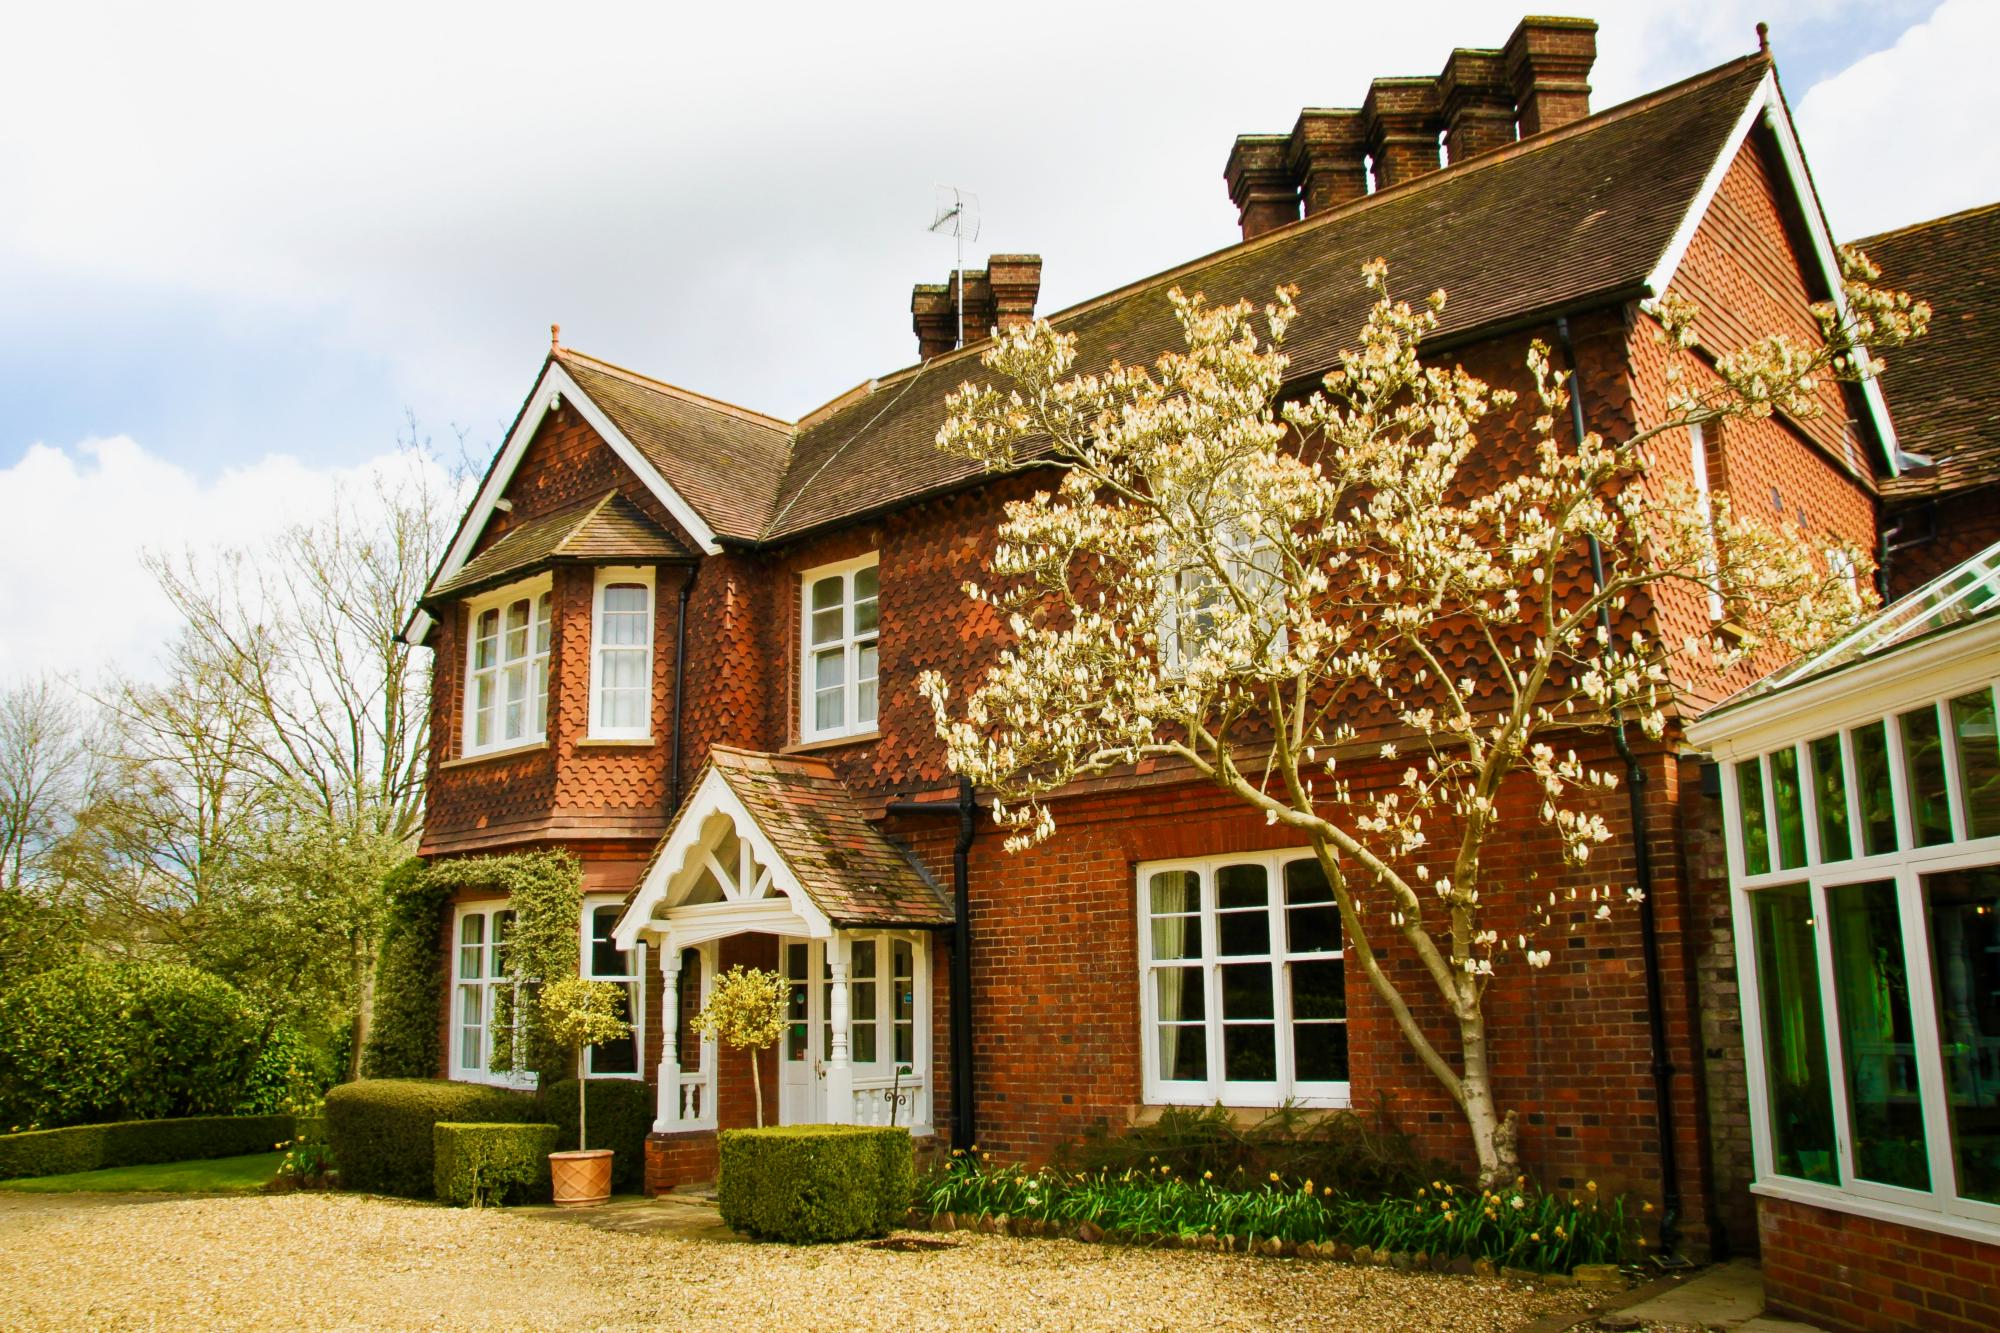 Hotels in Hertfordshire holidays at Cool Places